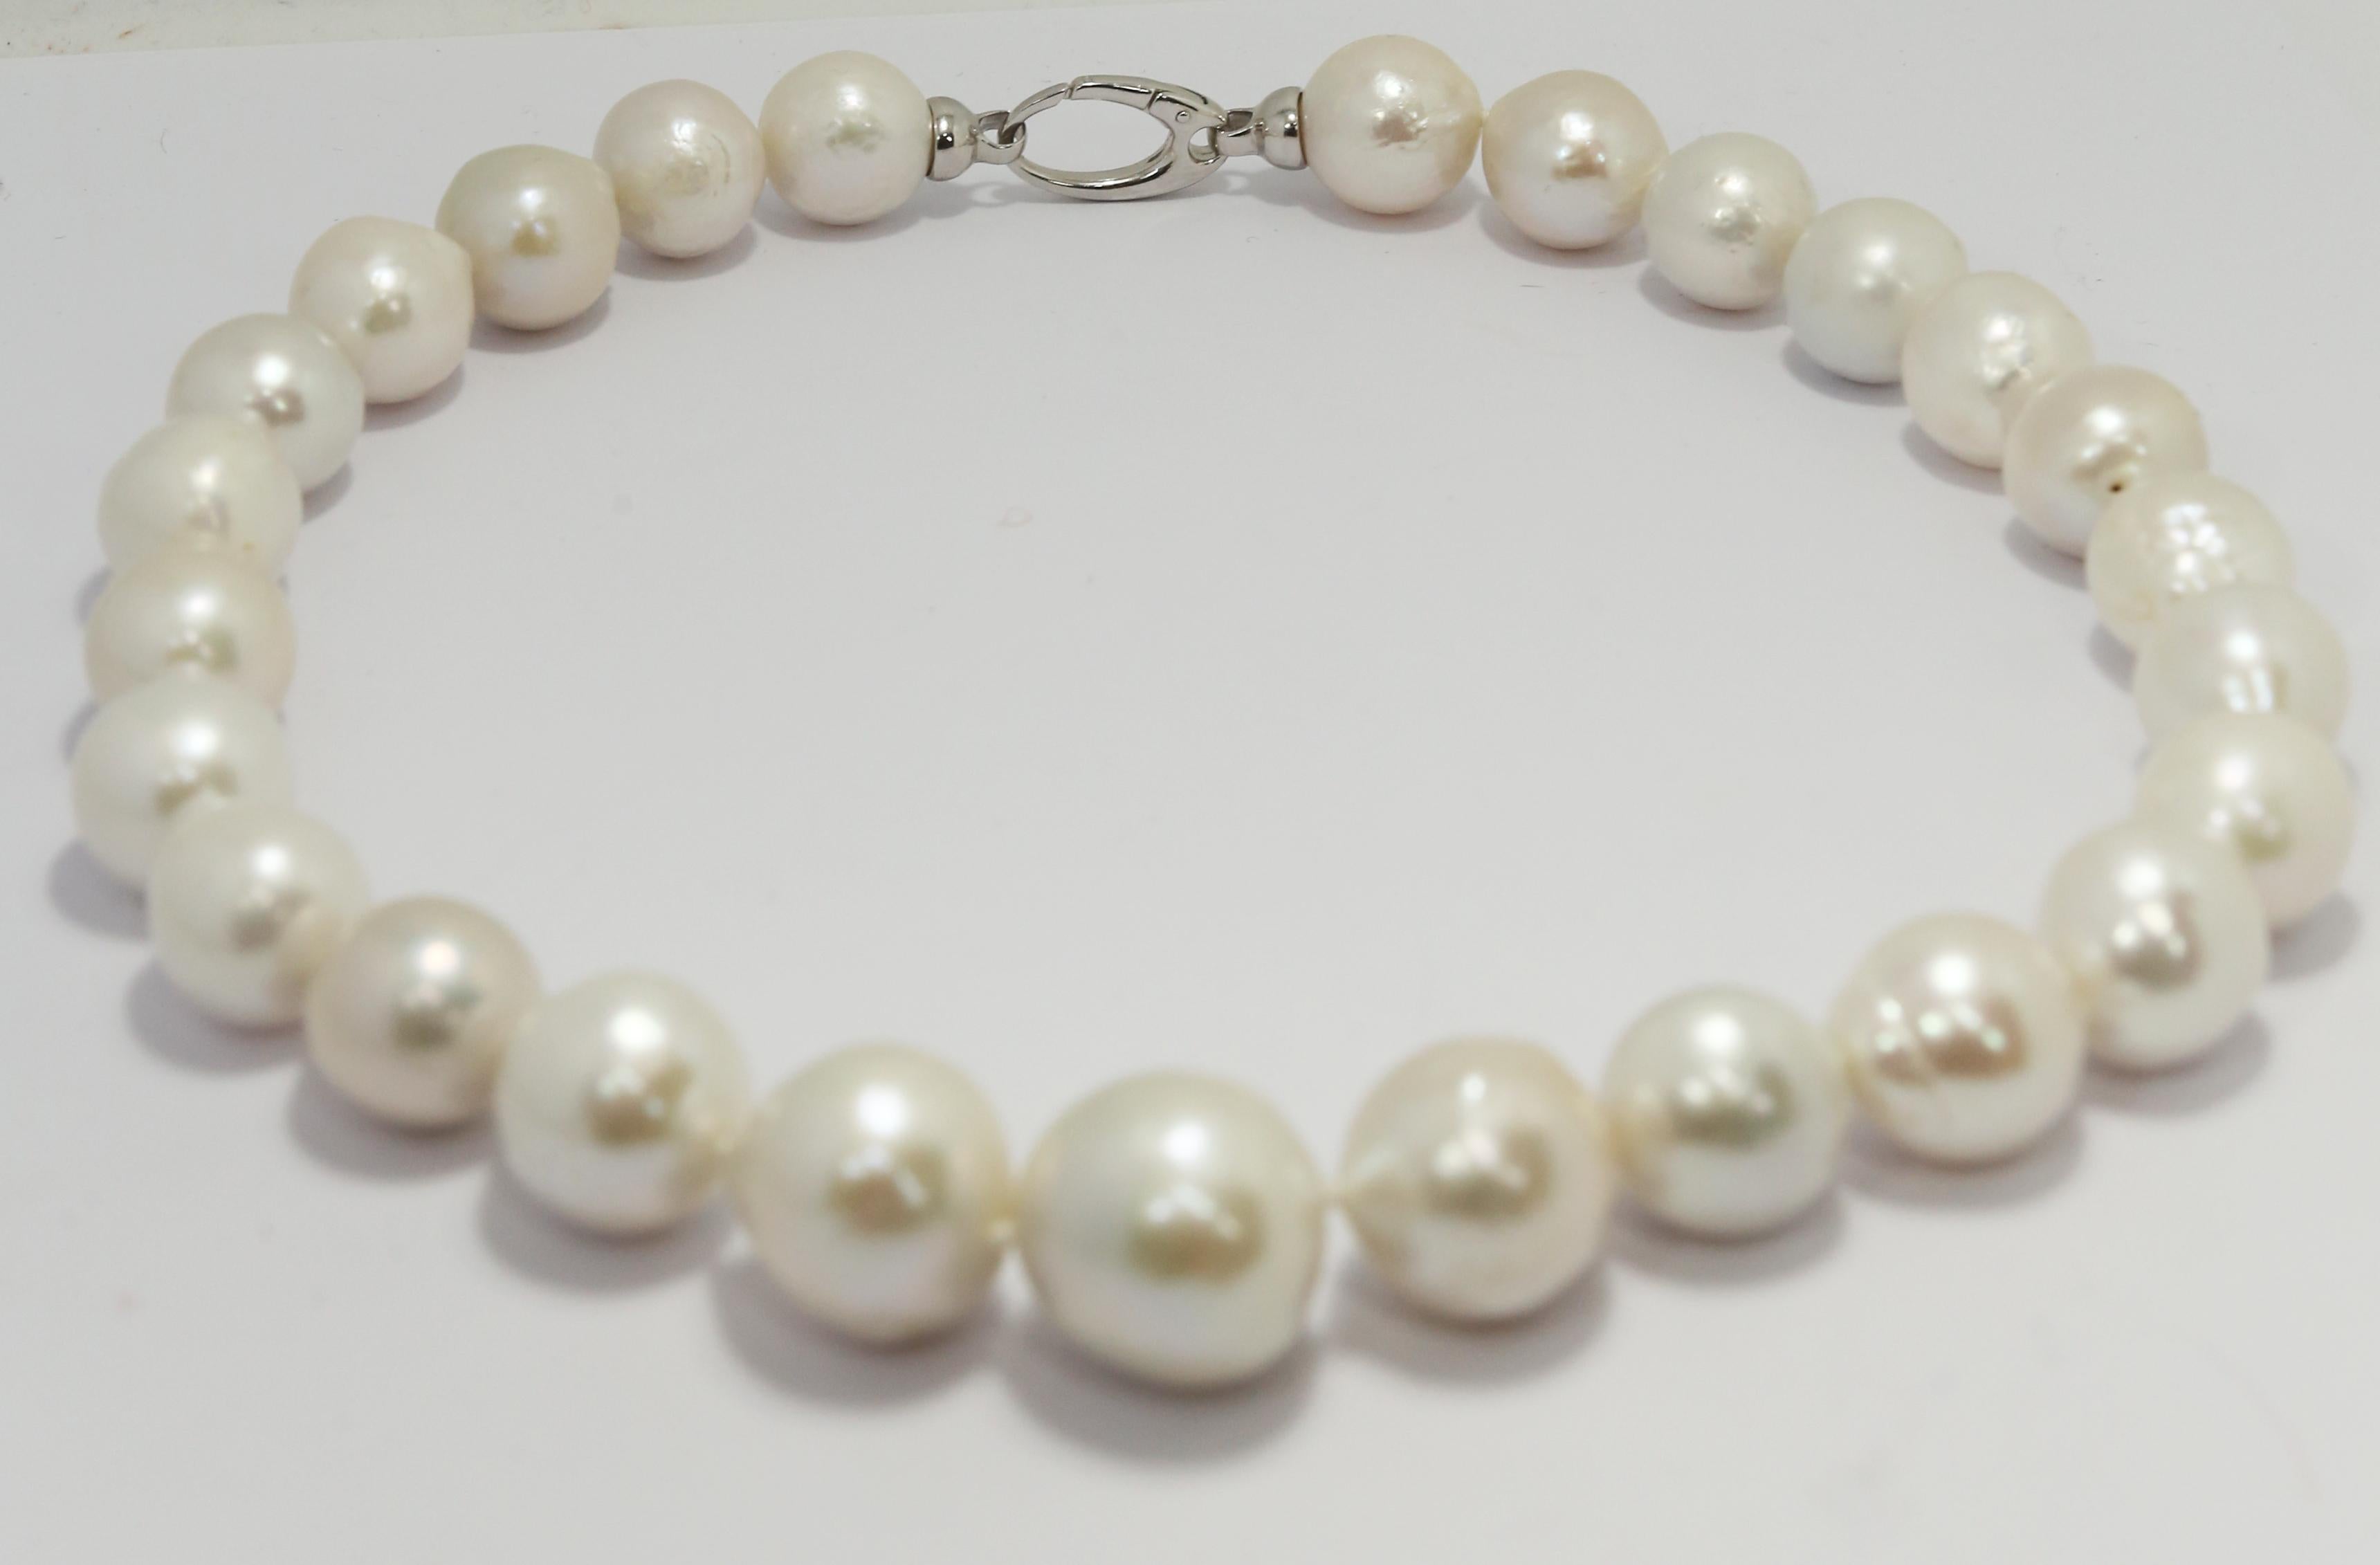 A classic yet contemporary baroque cultivated south sea pearl necklace with a sleek and functional sterling silver navette trigger clasp.
Necklace size 40cm + 3 cm of clasp  ( 15.74 x 1.18 inches )
Baroque pearls 26 of them with sizes from 14 to 17